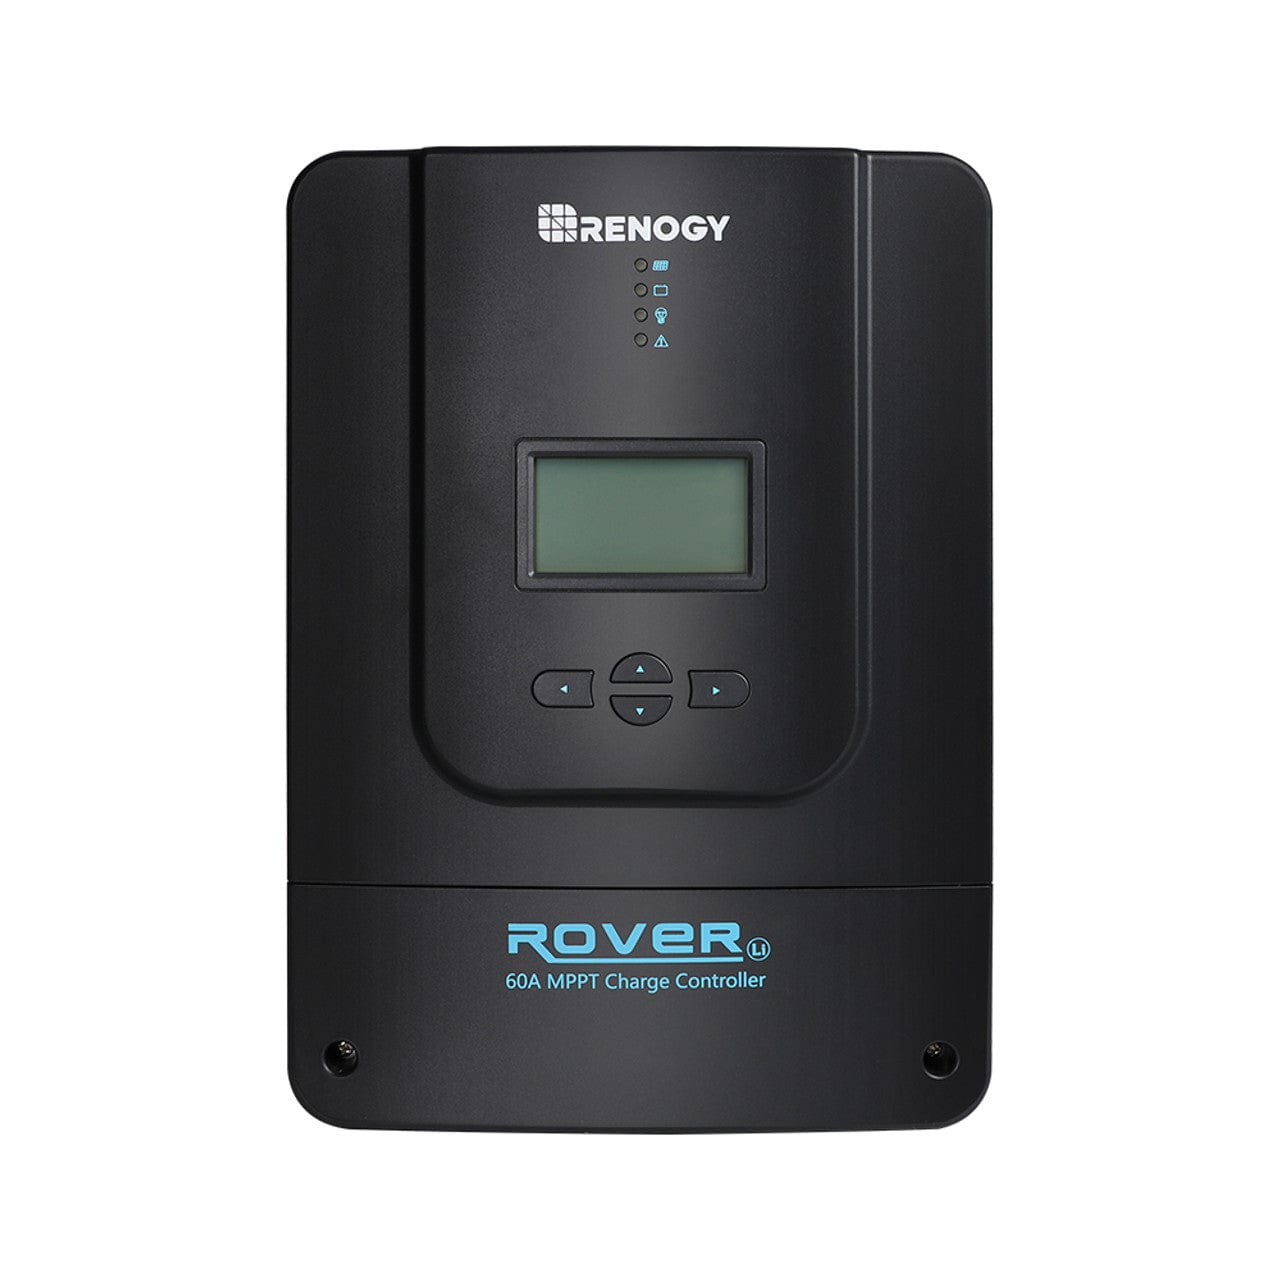 Renogy Rover 60 Amp MPPT Solar Charge Controller & BT-1 & Renogy ONE Core Renogy Solar Charge Controllers